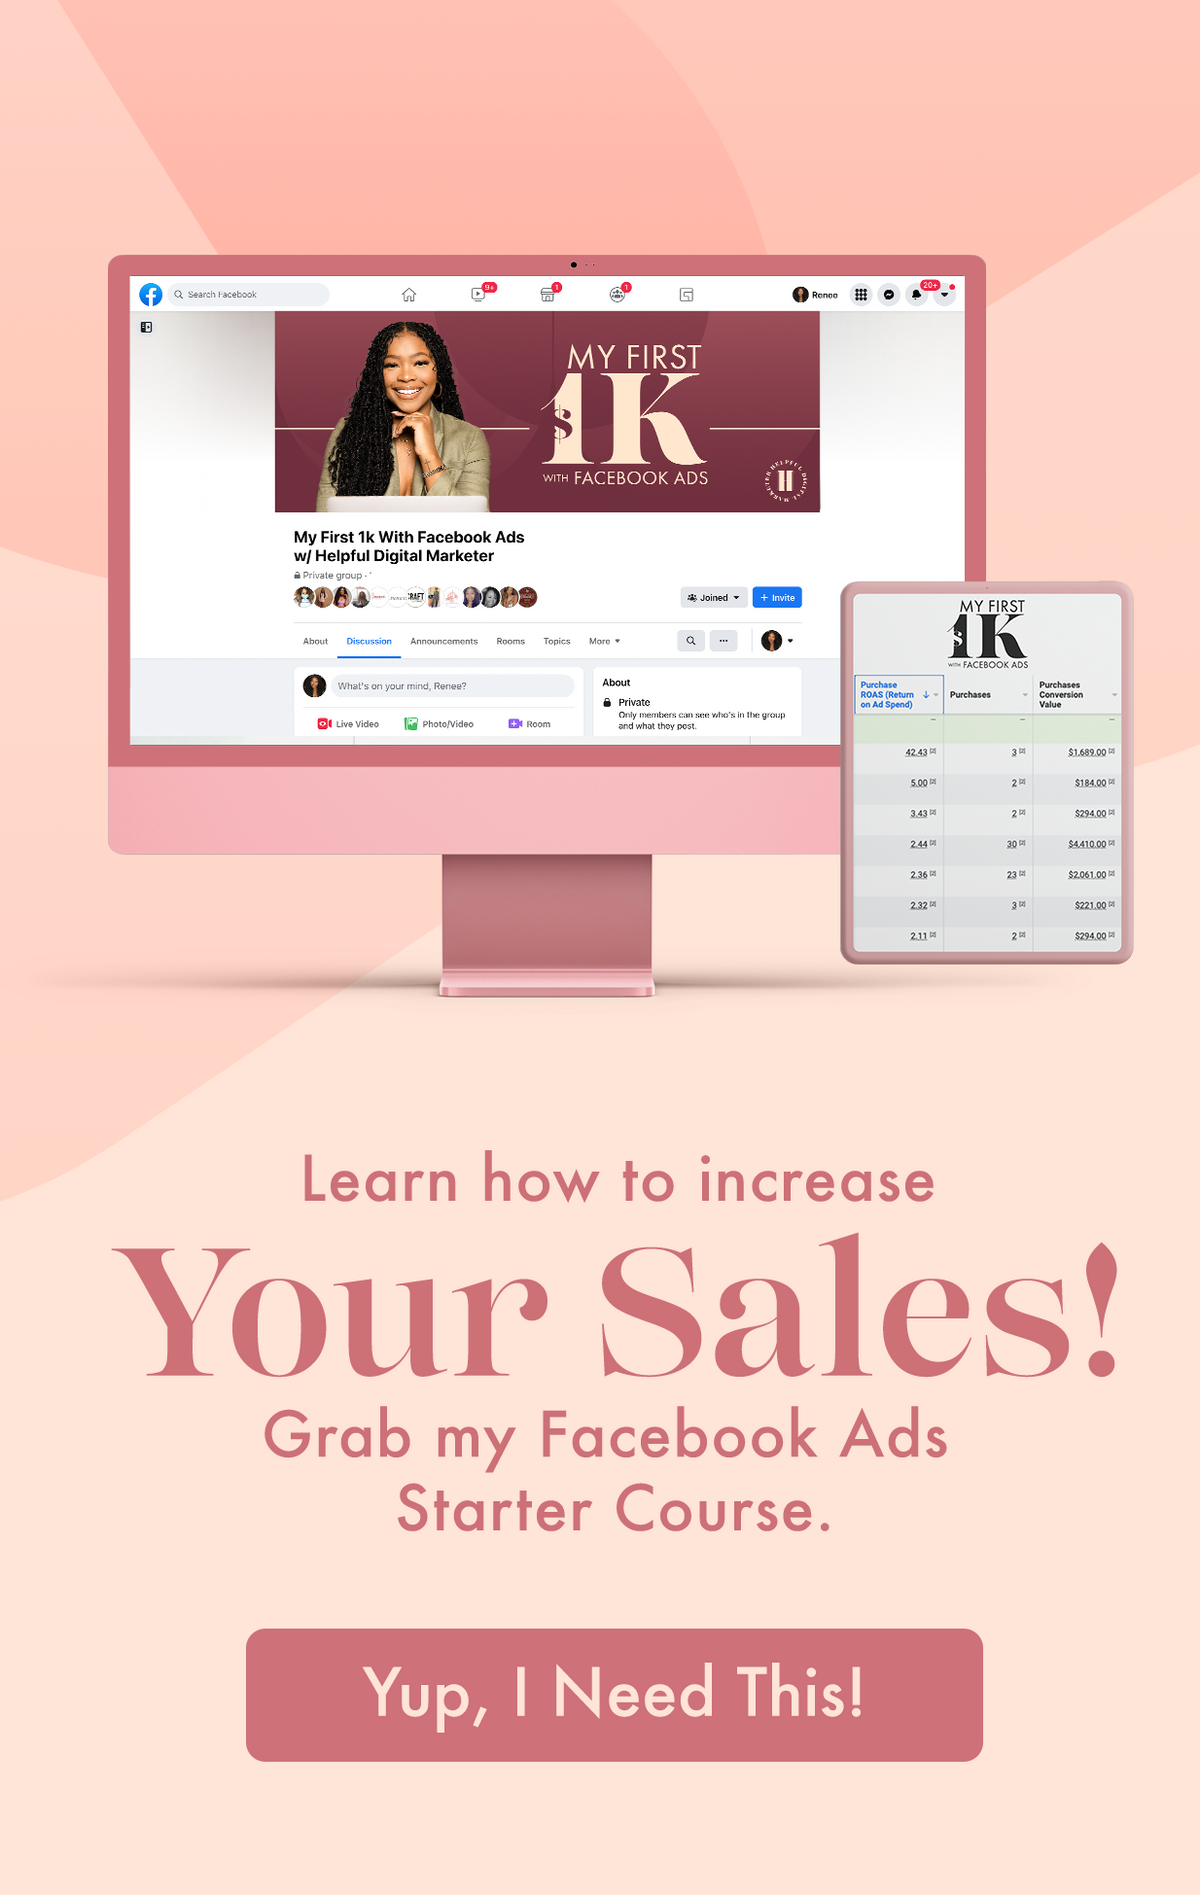 Learn how to Increase your Sales!